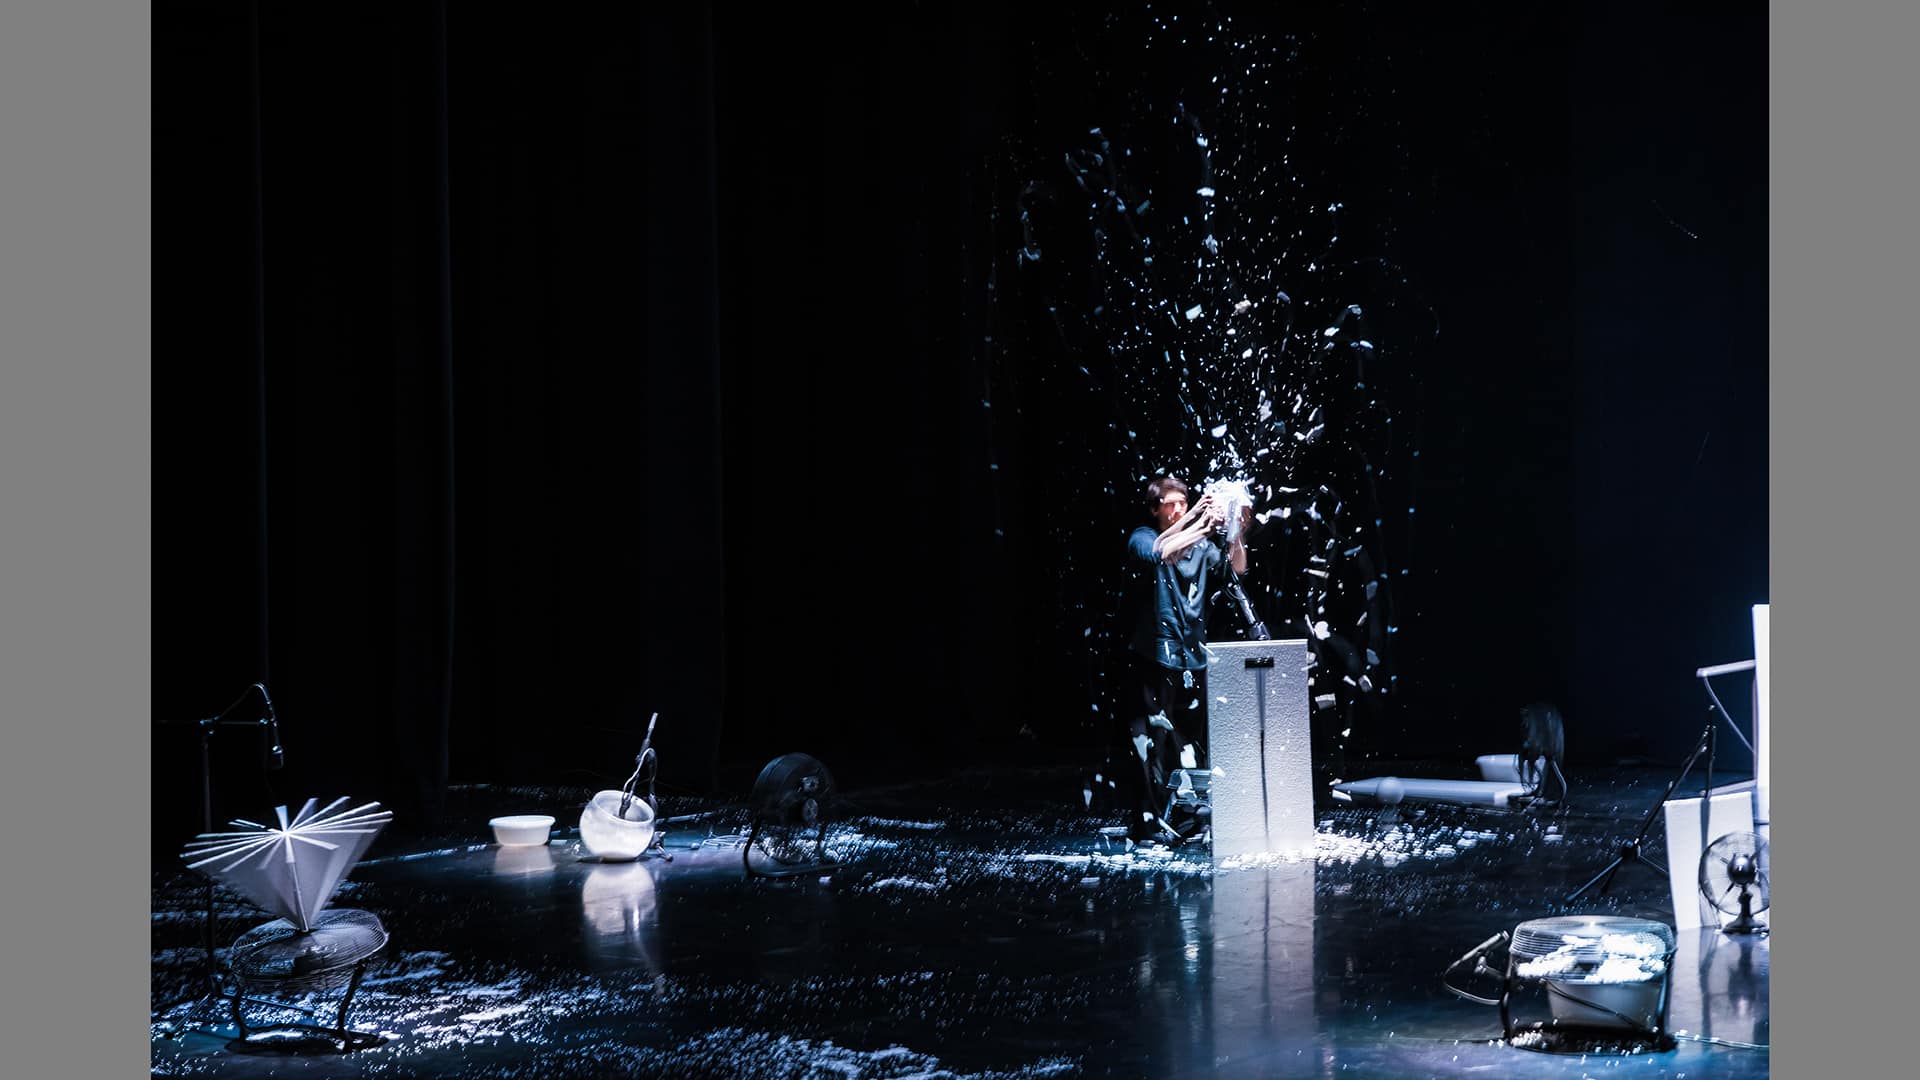 A photo of the show in progress, featuring a wide shot of the black stage space, scattered with small white objects and with a small human figure half-lit with white, holding a ball in a snowstorm